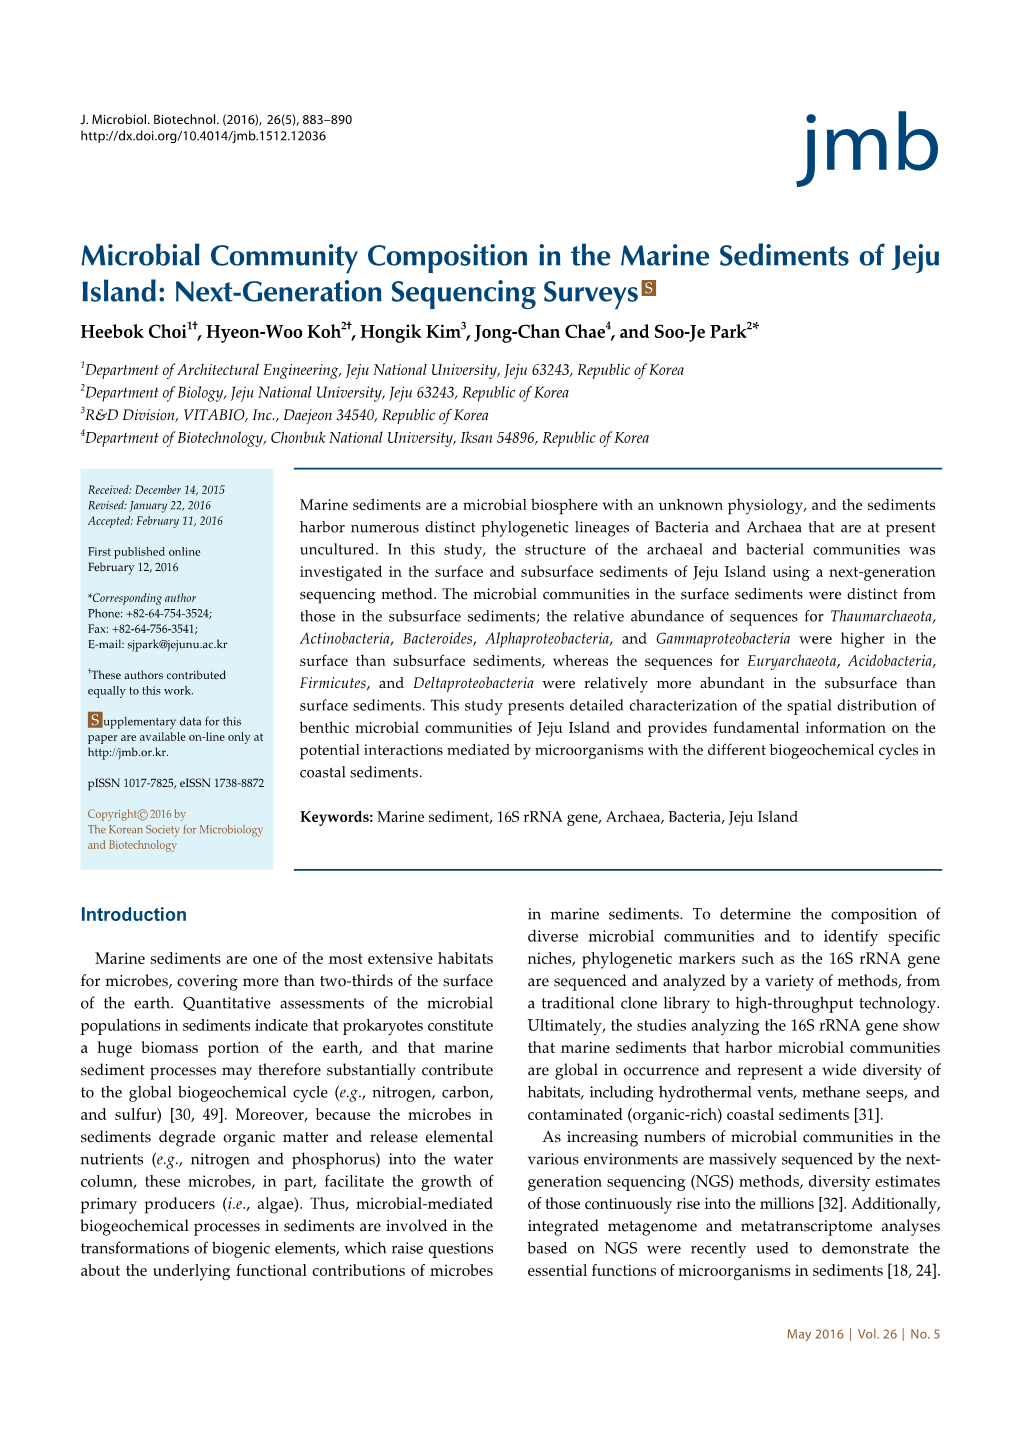 Microbial Community Composition in the Marine Sediments of Jeju Island: Next-Generation Sequencing Surveys